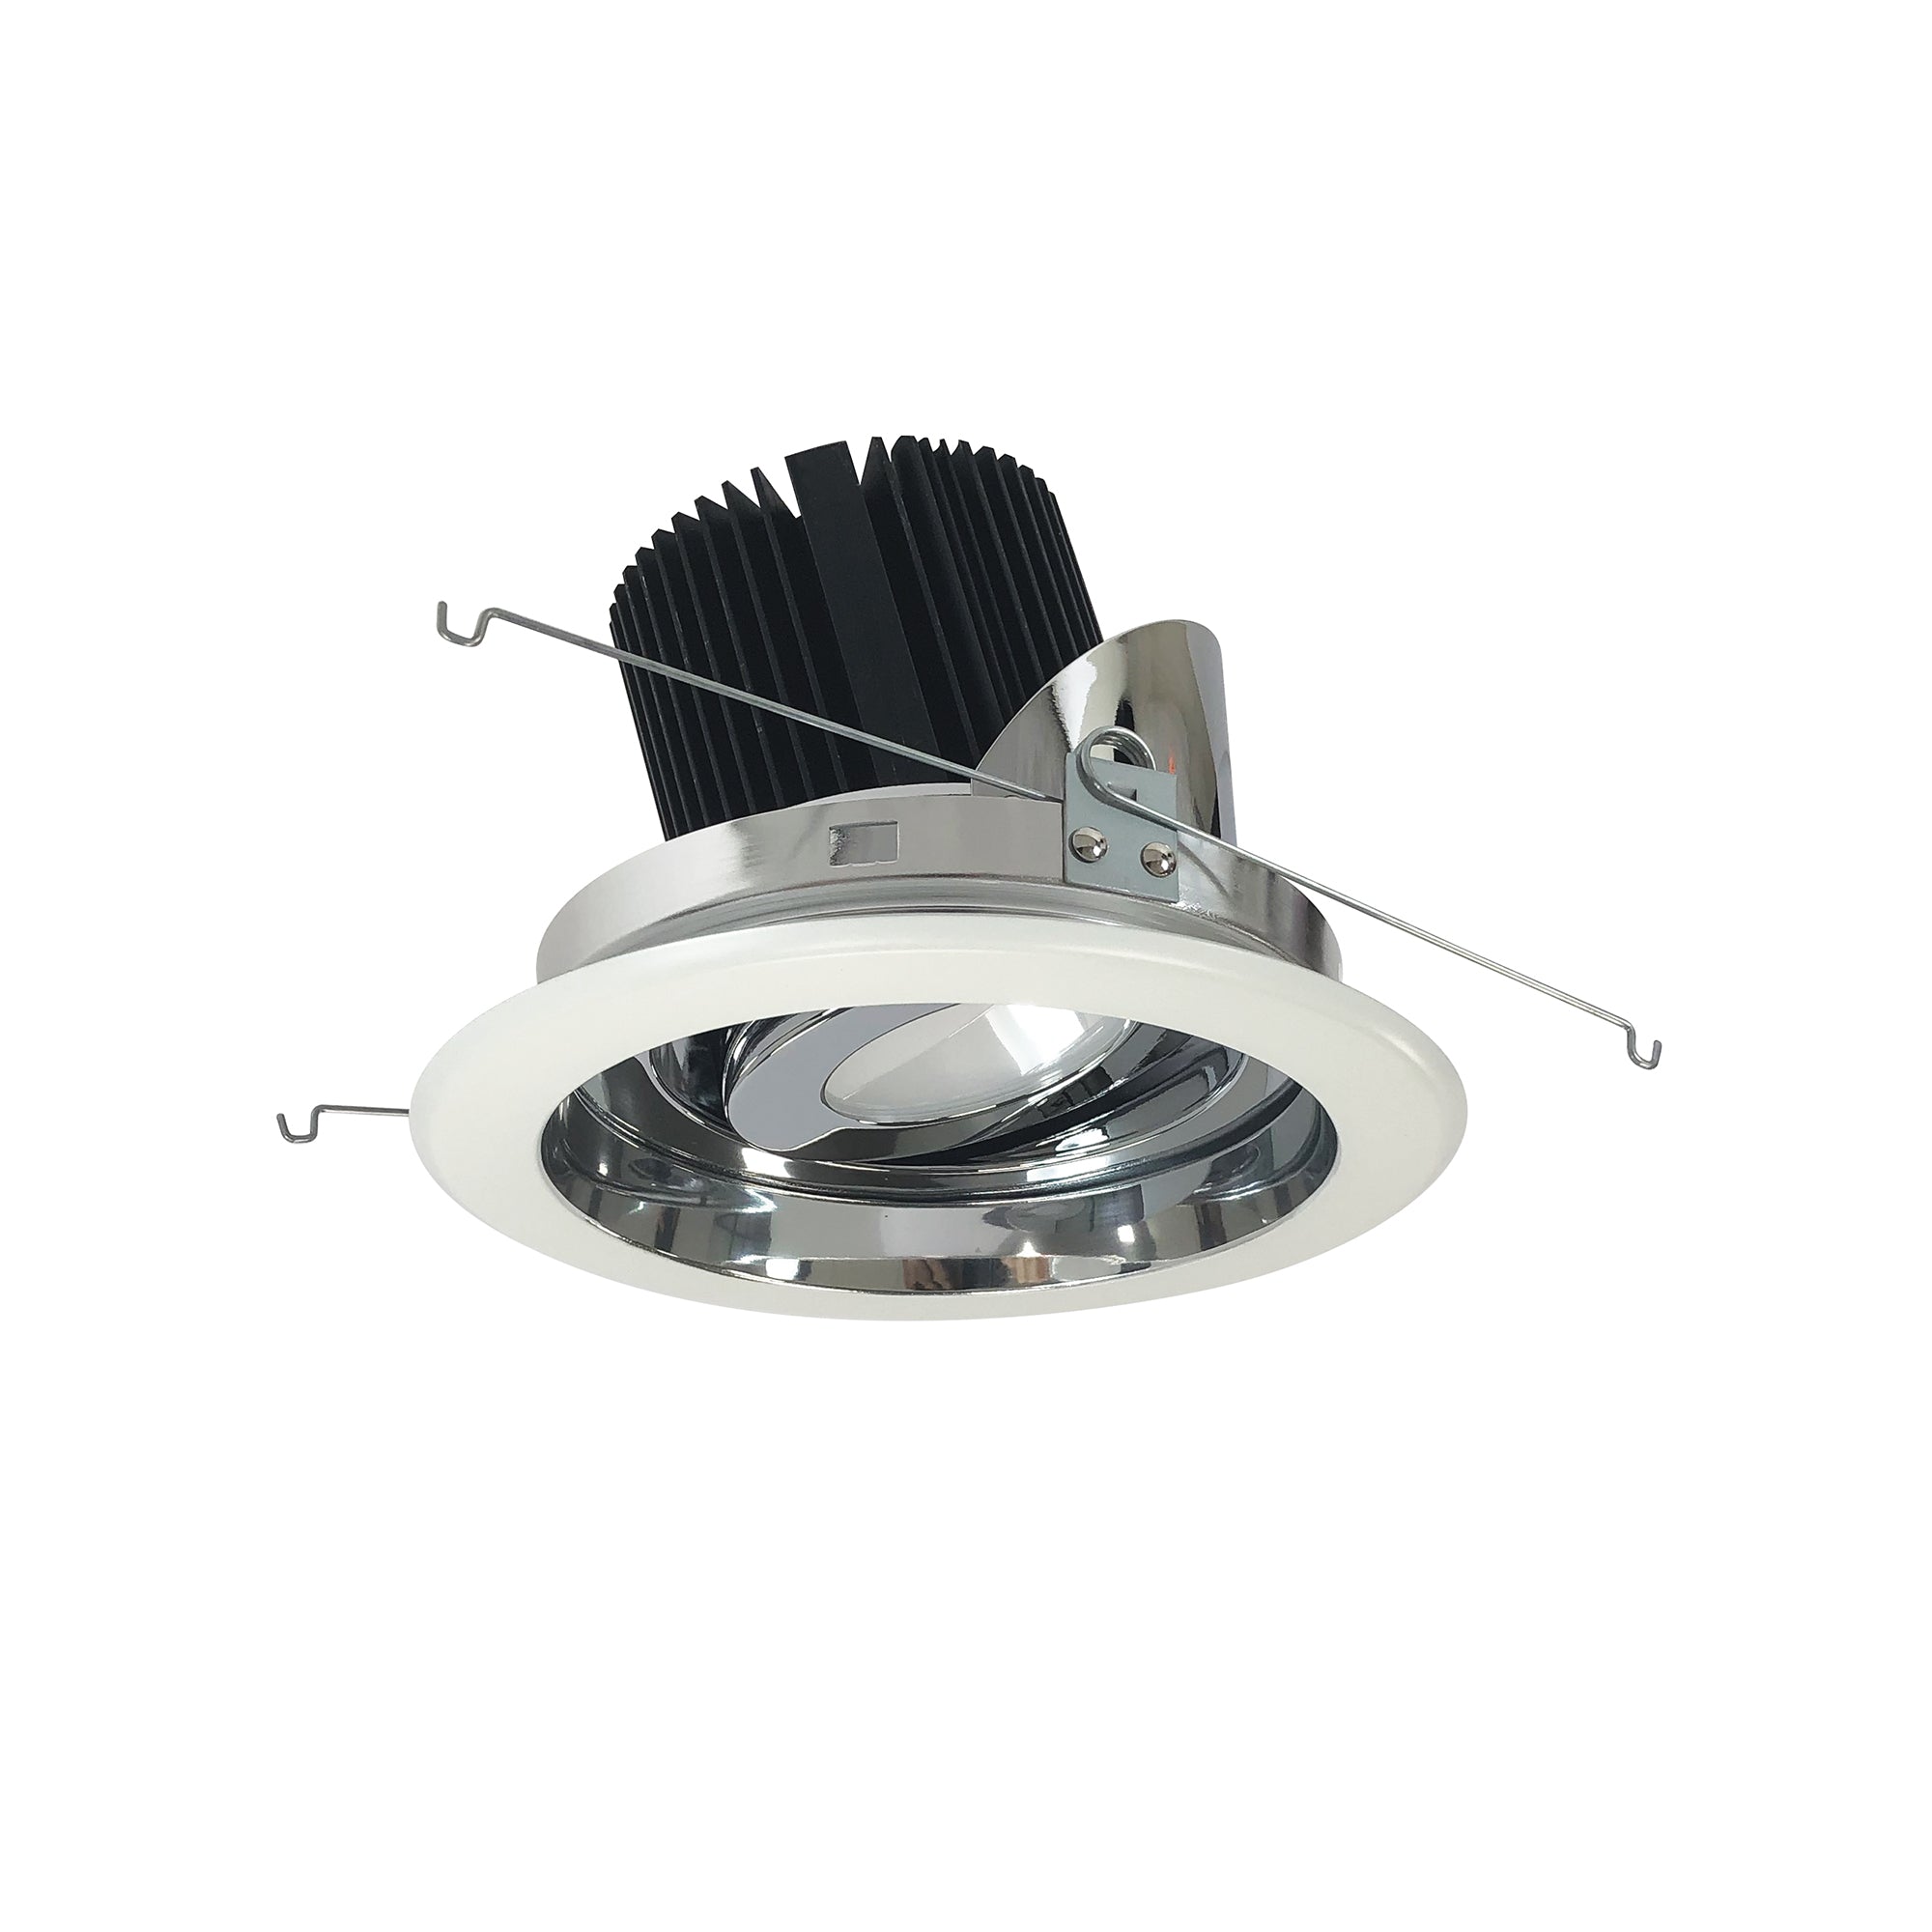 Nora Lighting NRM2-619L2535FCW - Recessed - 6 Inch Marquise II Round Regressed Adj. Reflector, Flood, 2500lm, 3500K, Specular Clear/White (Not Compatible with NHRM2-625 Housings)